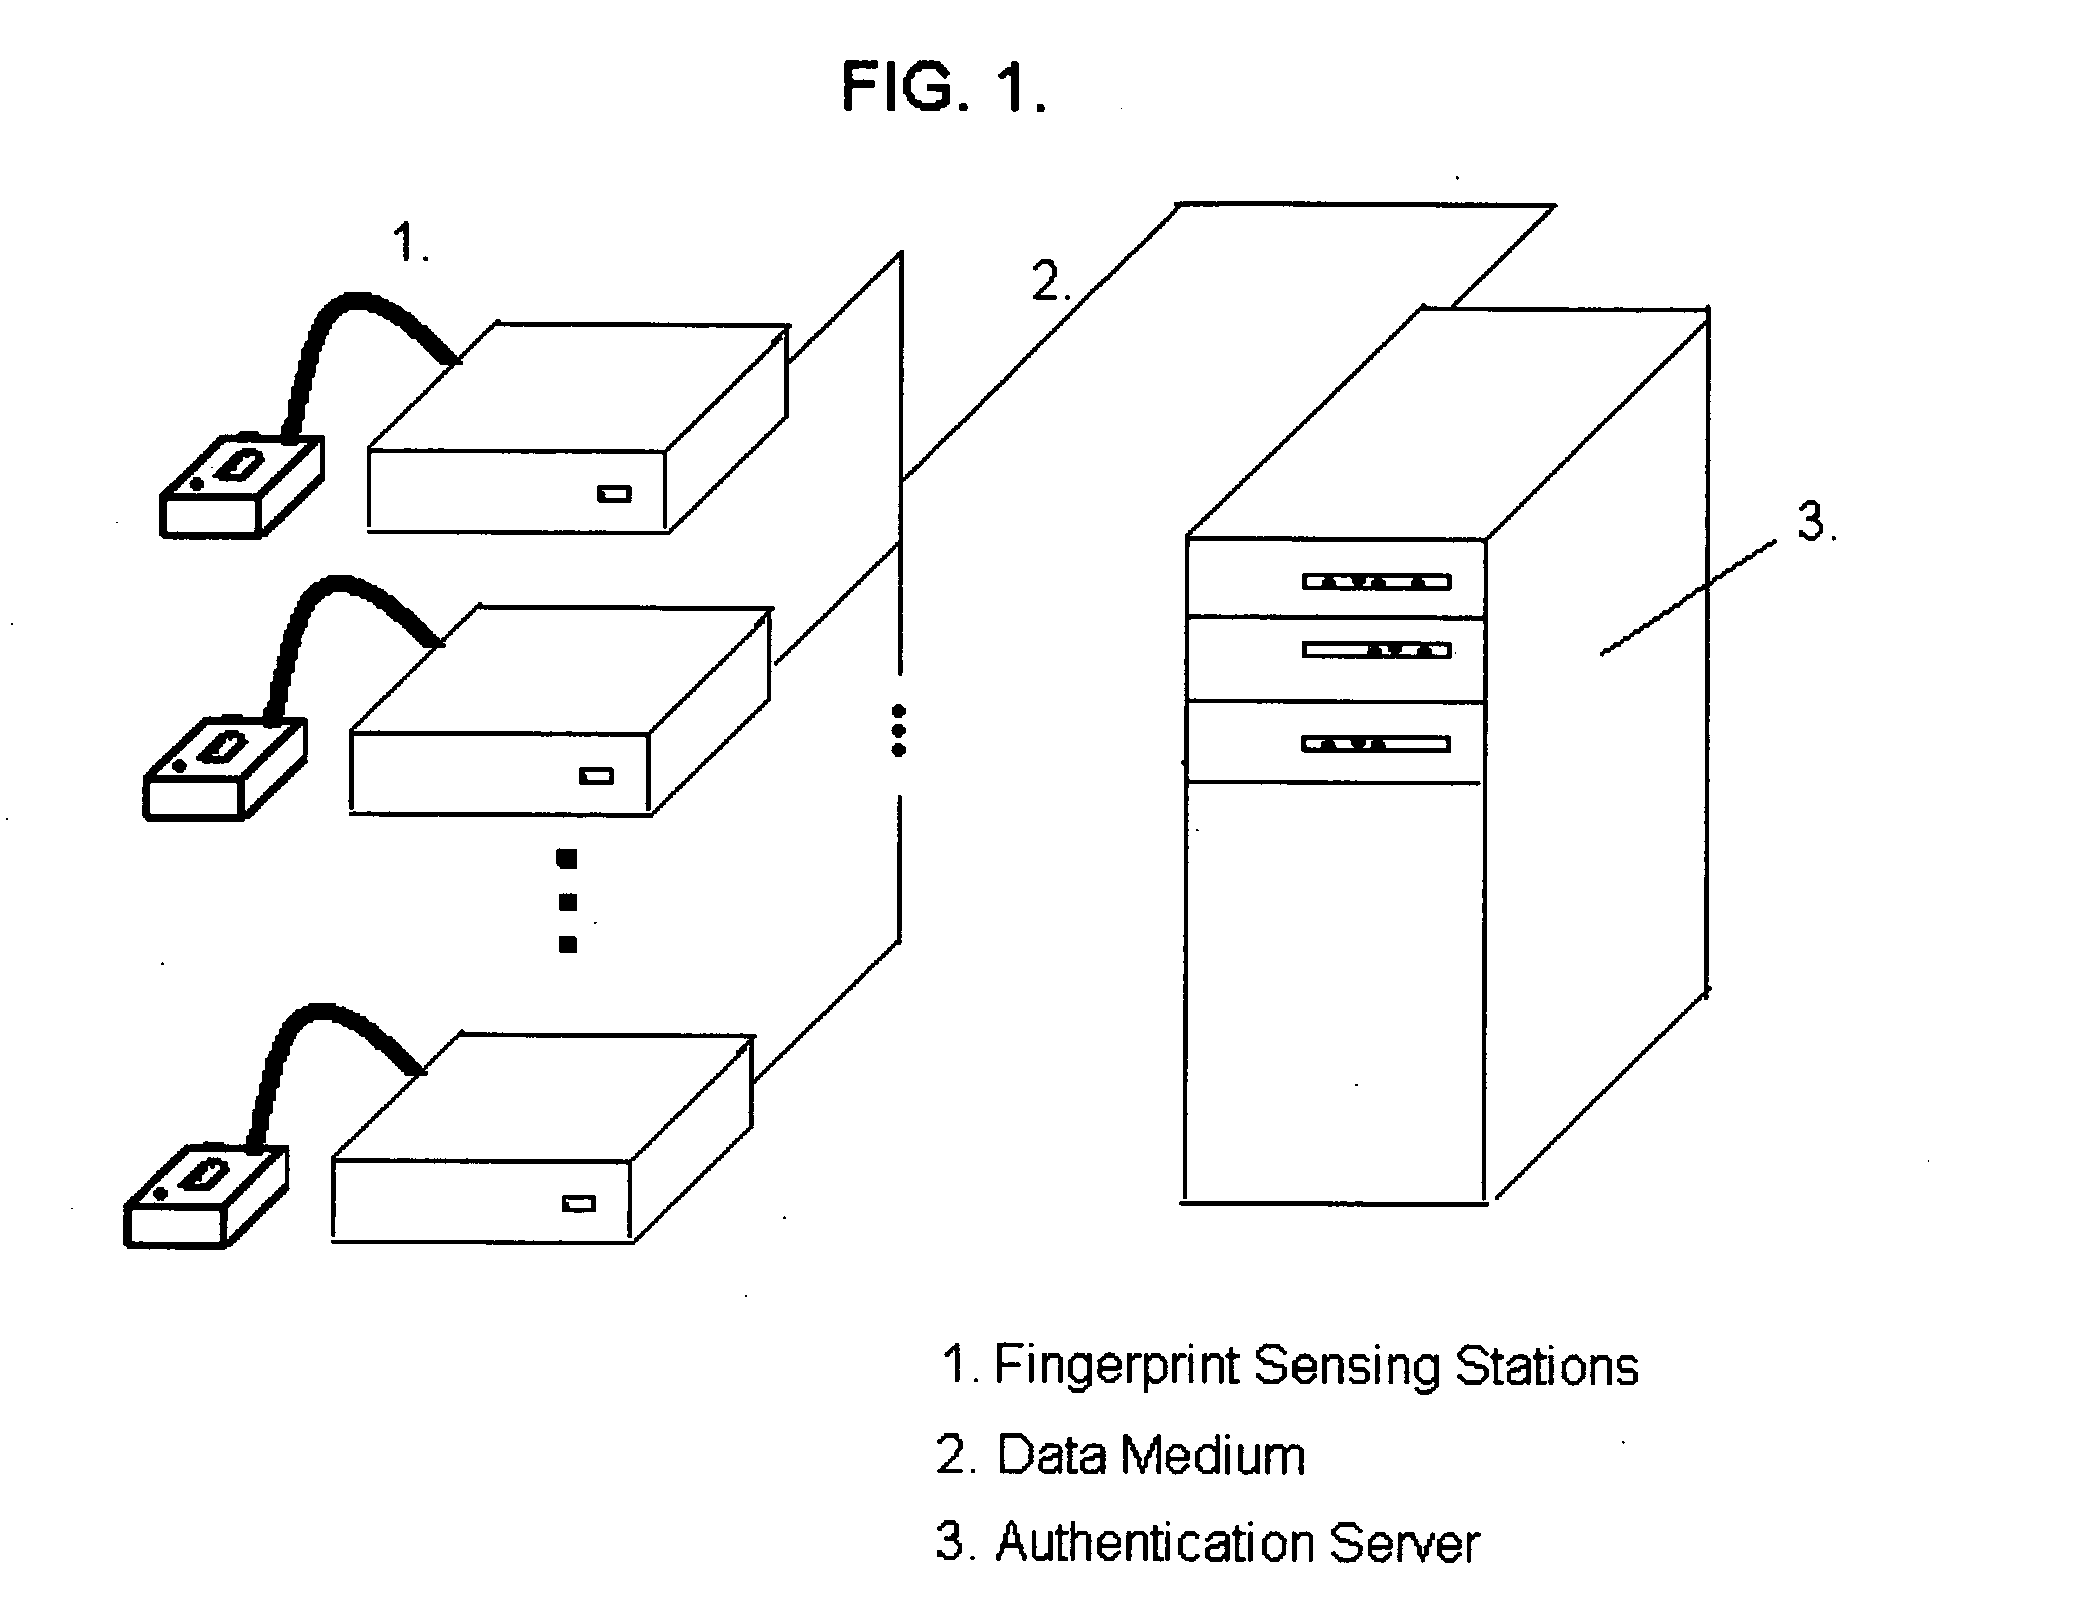 Technique using order and timing for enhancing fingerprint authentication system effectiveness